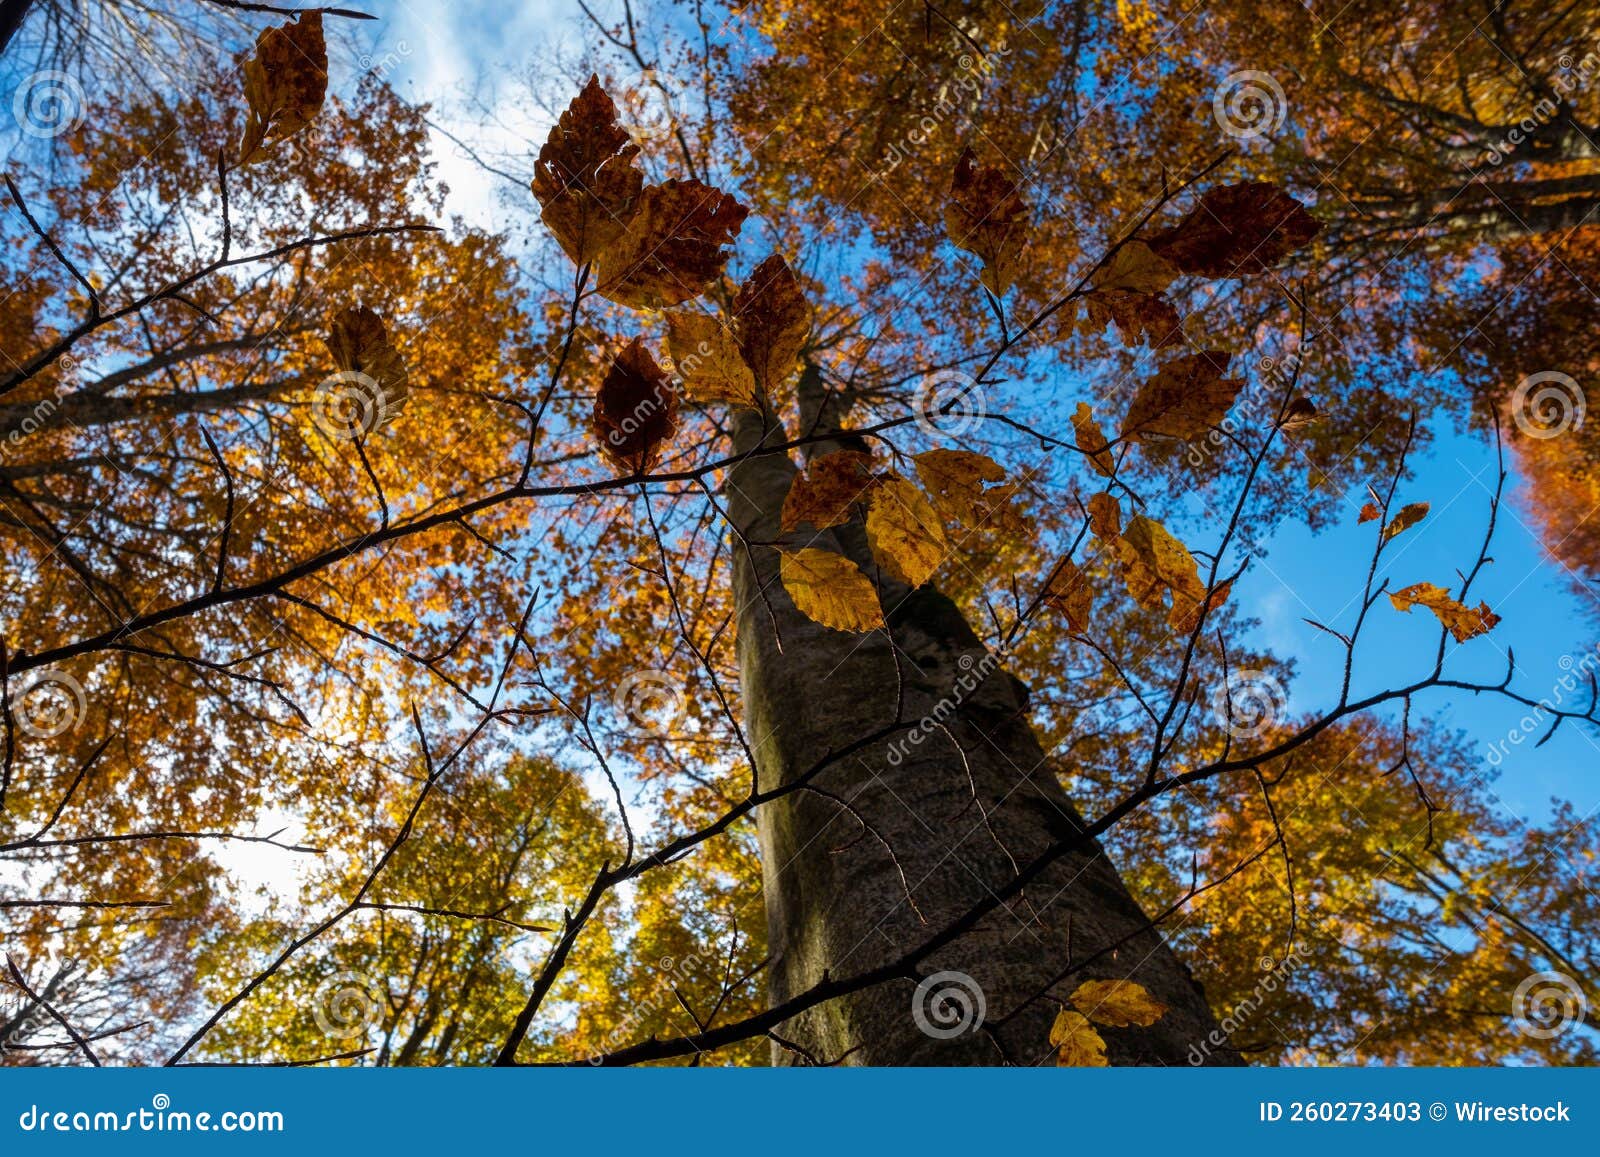 Low Angle Shot Foliage Cansiglio Forest Venetian Dolomites Italy 260273403 